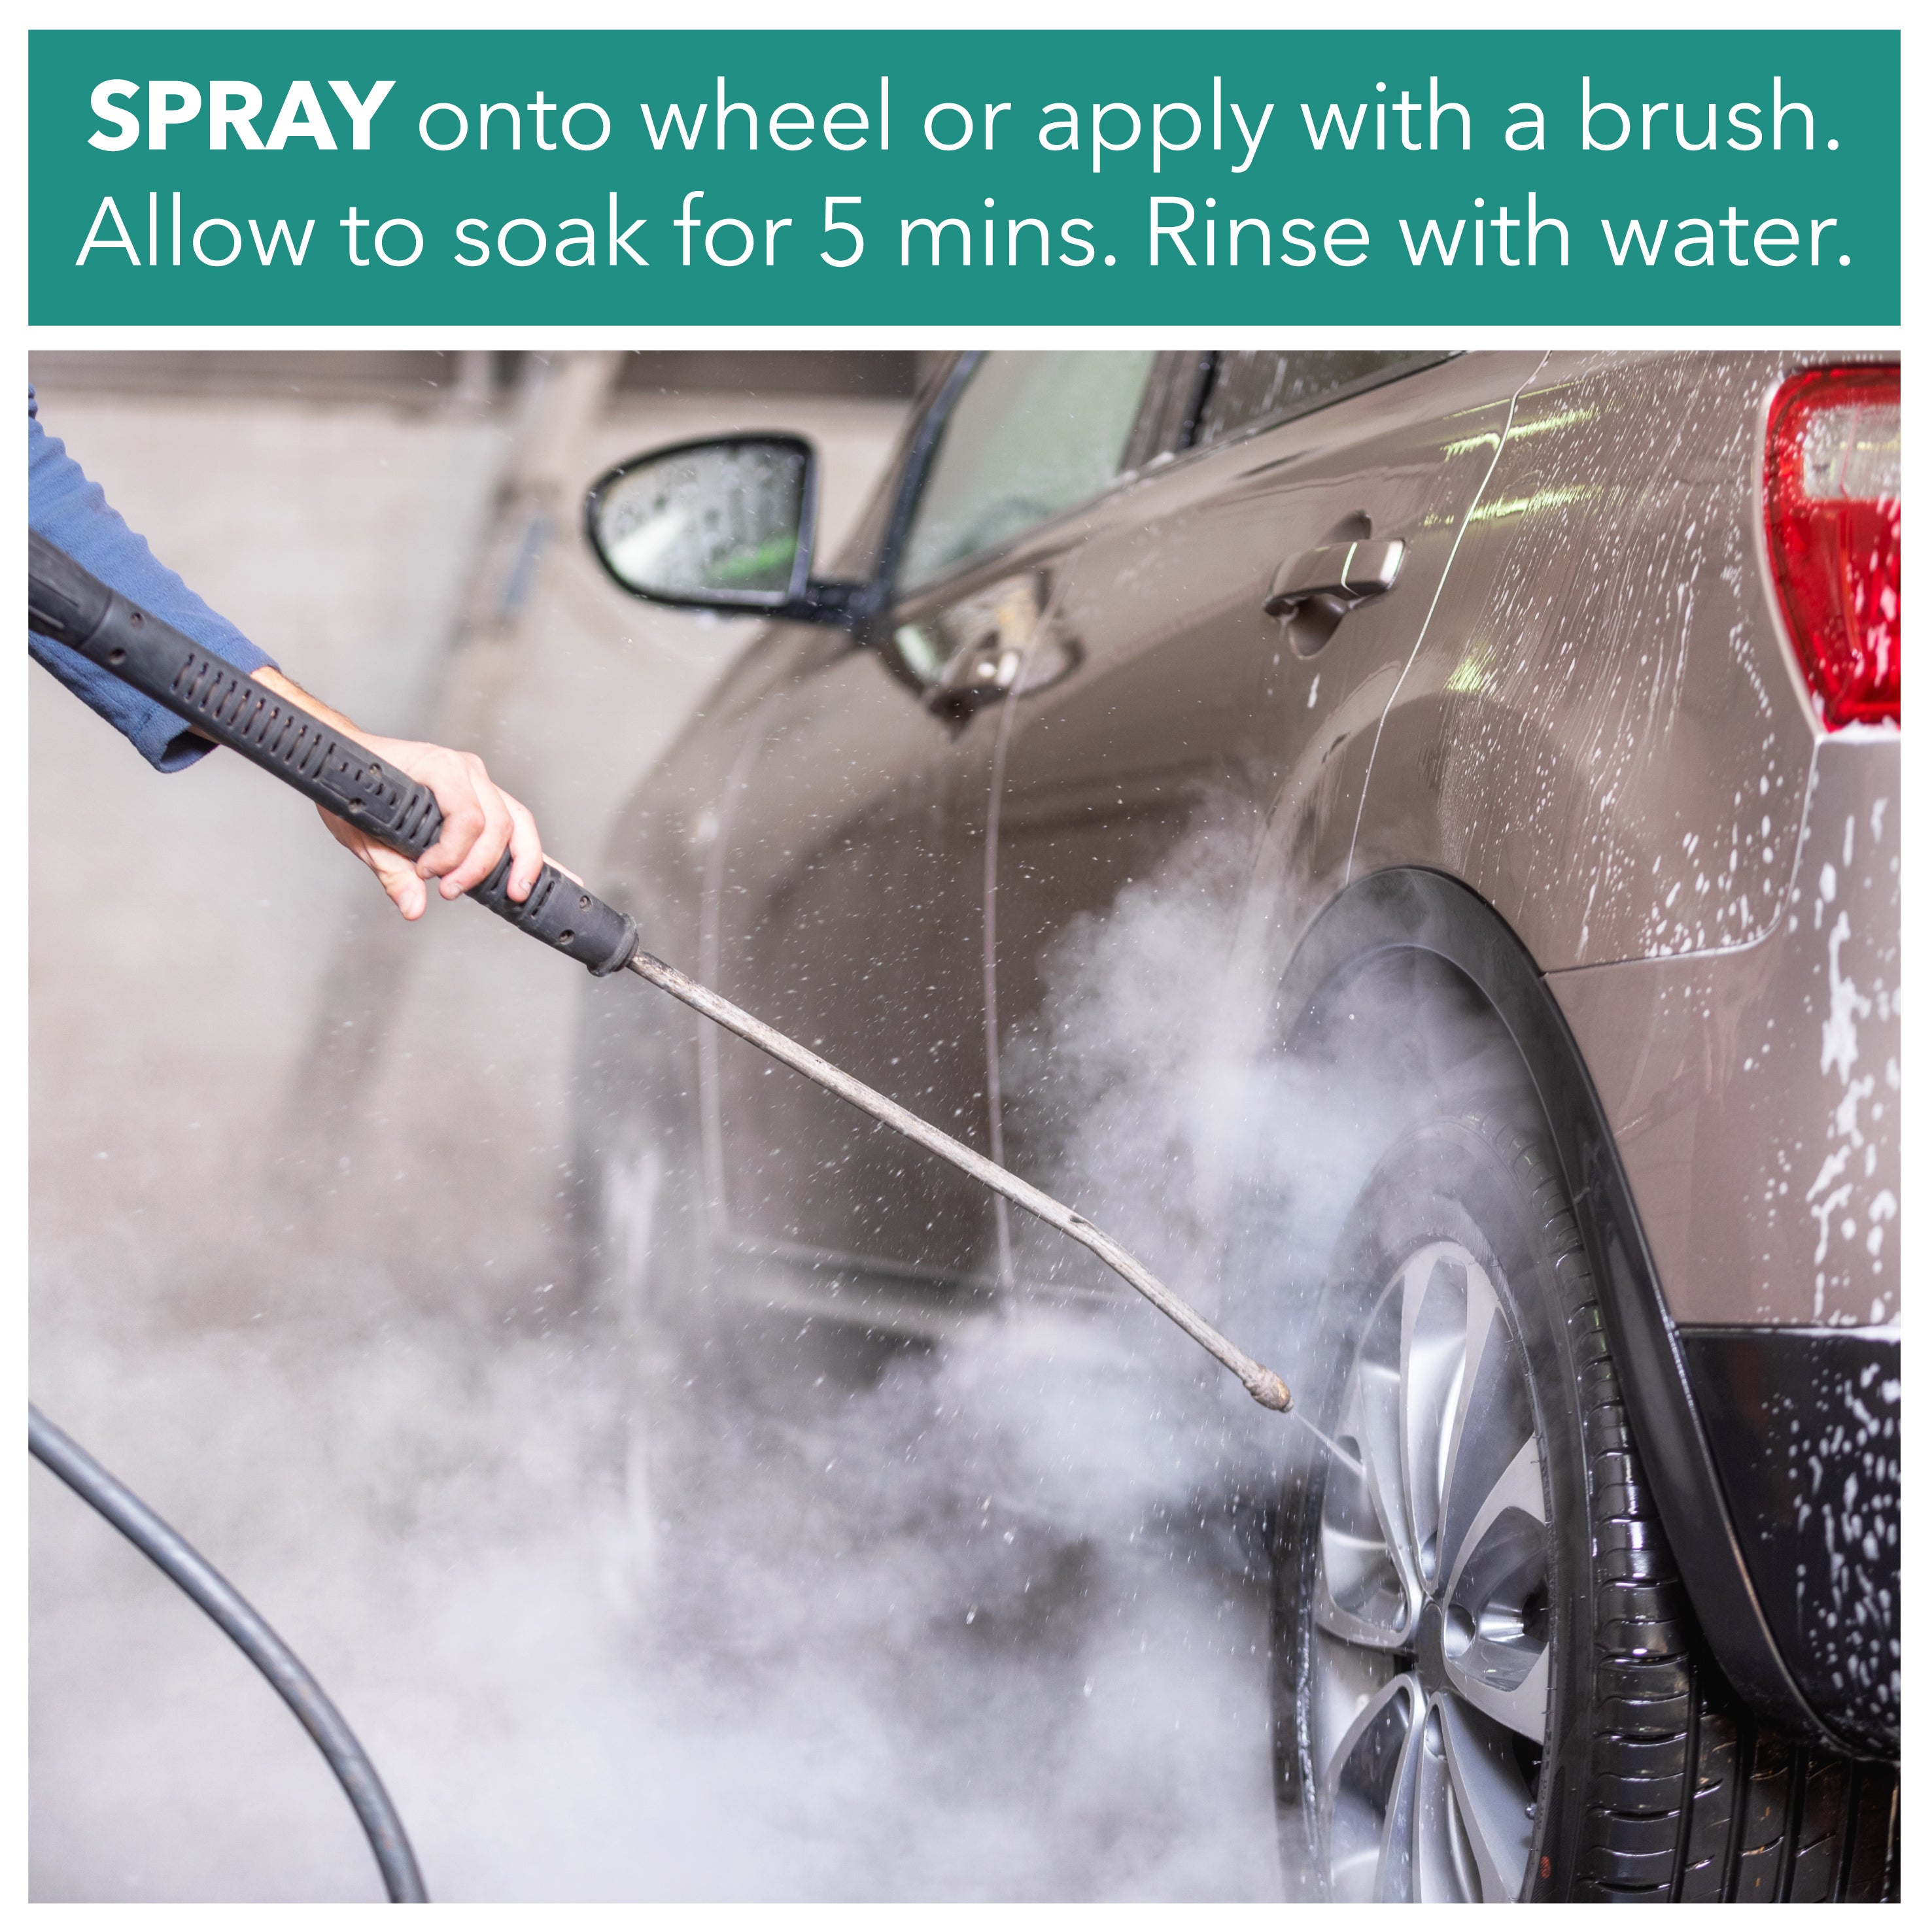 spray onto wheels or apply with a brush, allow to soak for 5 mins, rinse with water 